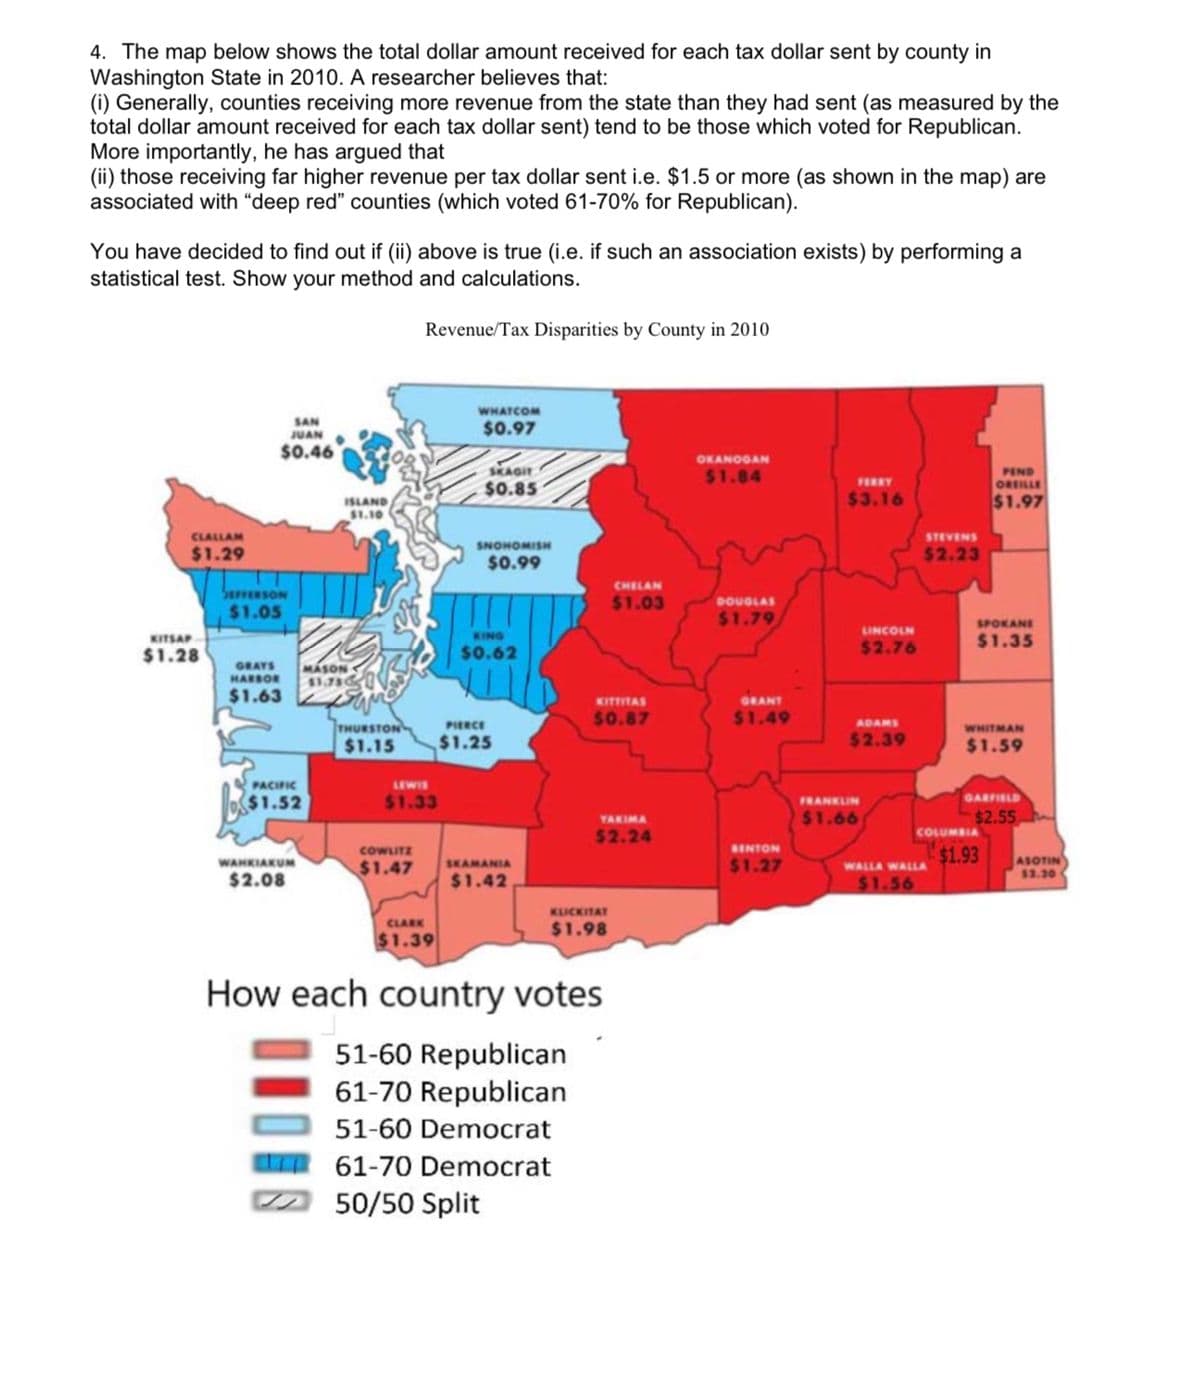 4. The map below shows the total dollar amount received for each tax dollar sent by county in
Washington State in 2010. A researcher believes that:
(i) Generally, counties receiving more revenue from the state than they had sent (as measured by the
total dollar amount received for each tax dollar sent) tend to be those which voted for Republican.
More importantly, he has argued that
(ii) those receiving far higher revenue per tax dollar sent i.e. $1.5 or more (as shown in the map) are
associated with "deep red" counties (which voted 61-70% for Republican).
You have decided to find out if (ii) above is true (i.e. if such an association exists) by performing a
statistical test. Show your method and calculations.
CLALLAM
$1.29
KITSAP
$1.28
SAN
JUAN
$0.46
SEFFERSON
$1.05
GRAYS MASON
HARBOR
$1.75
$1.63
PACIFIC
$1.52
ISLAND
$1.10
WAHKIAKUM
$2.08
THURSTON
$1.15
Revenue/Tax Disparities by County in 2010
$1.33
WHATCOM
$0.97
CLARK
$1.39
SKAGIT
$0.85
SNOHOMISH
$0.99
KING
$0.62
PIERCE
$1.25
COWLITZ
$1.47 SKAMANIA
$1.42,
KITTITAS
$0.87
YAKIMA
$2.24
KLICKITAT
$1.98
CHELAN
$1.03 DOUGLAS
$1.79
How each country votes
51-60 Republican
61-70 Republican
51-60 Democrat
61-70 Democrat
50/50 Split
OKANOGAN
$1.84
GRANT
$1.49
BENTON
$1.27
FERRY
$3.16
LINCOLN
$2.76
ADAMS
$2.39
FRANKLIN
$1.66
STEVENS
$2.23
WALLA WALLA
$1.56
PEND
OREILLE
$1.97
SPOKANE
$1.35
WHITMAN
$1.59
COLUMBIA
$1.93
GARFIELD
$2.55
ASOTIN
$3.30